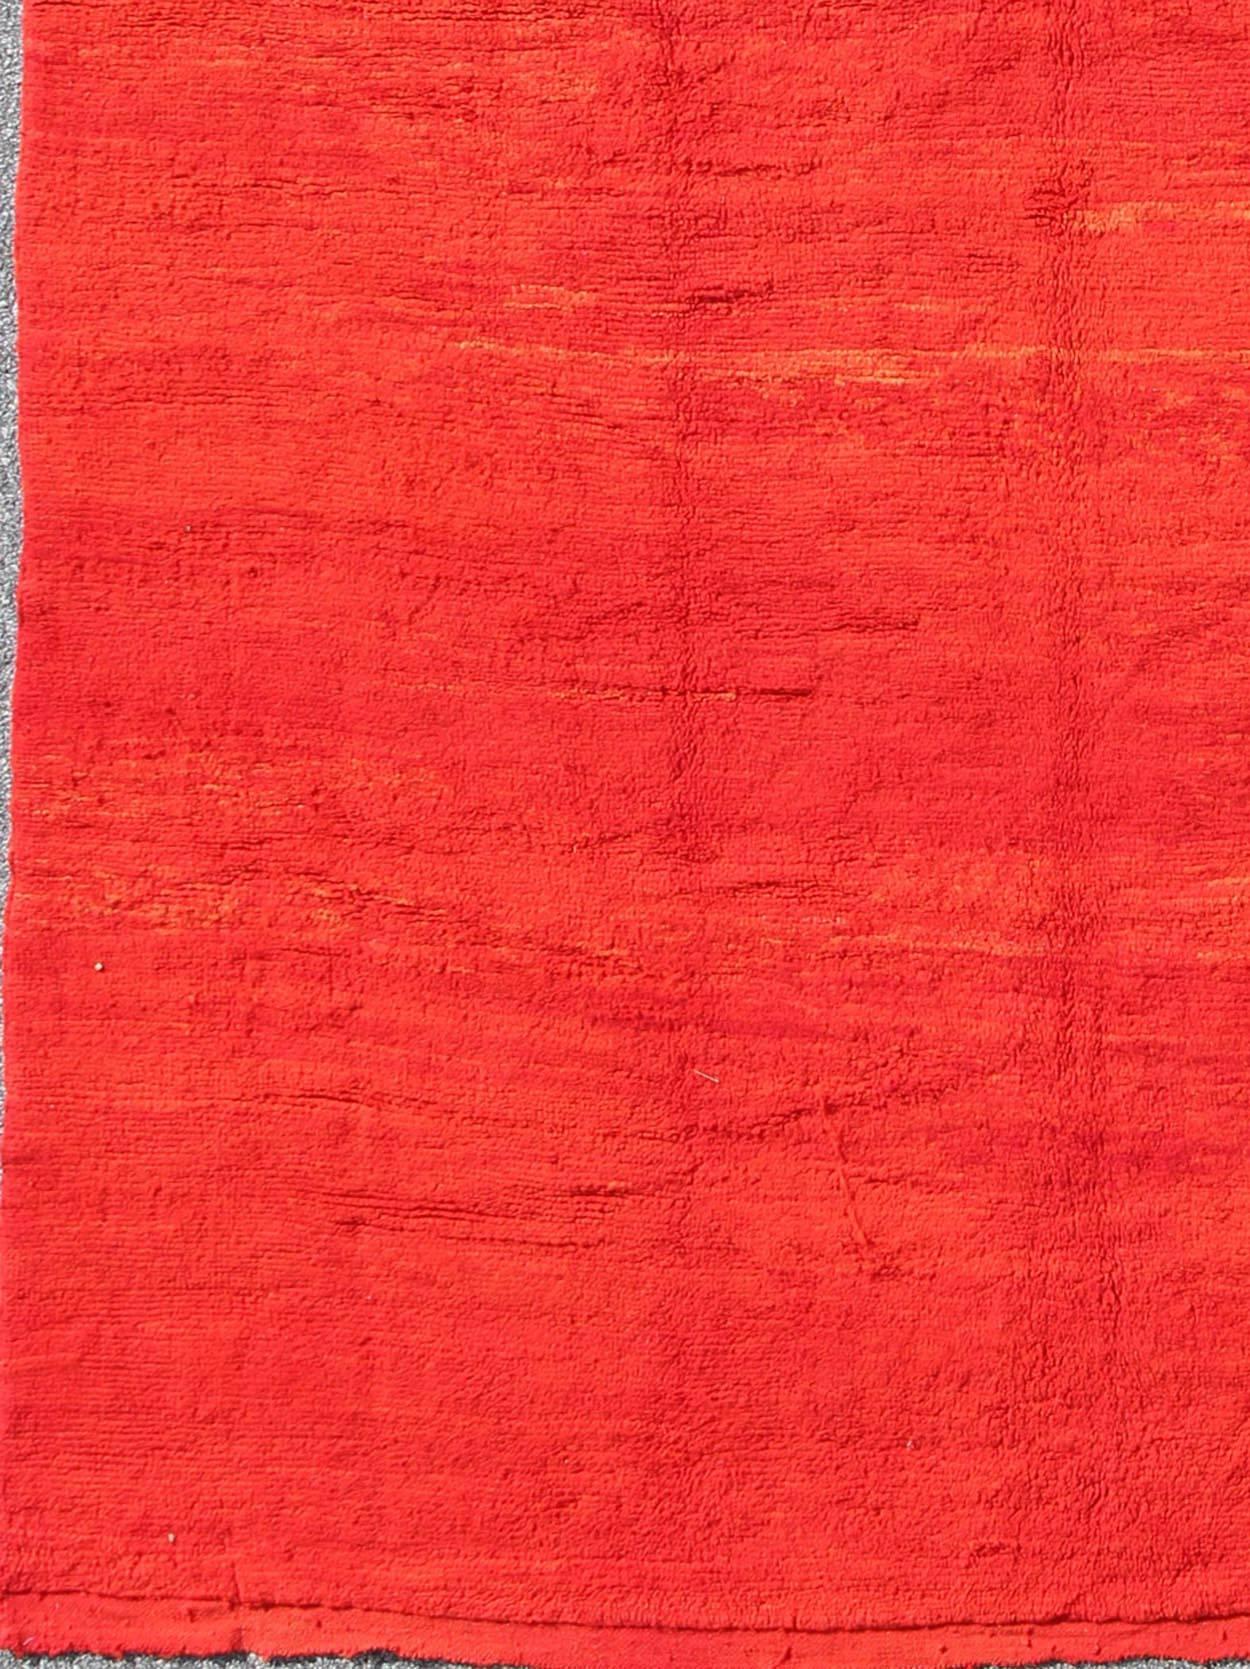 Mid-20th century vintage Moroccan rug with solid variegated red background, rug bds-k423, country of origin / type: Morocco / Tribal, circa 1950

This lovely mid-century vintage Moroccan rug displays a multitude of red and orange tones that vary